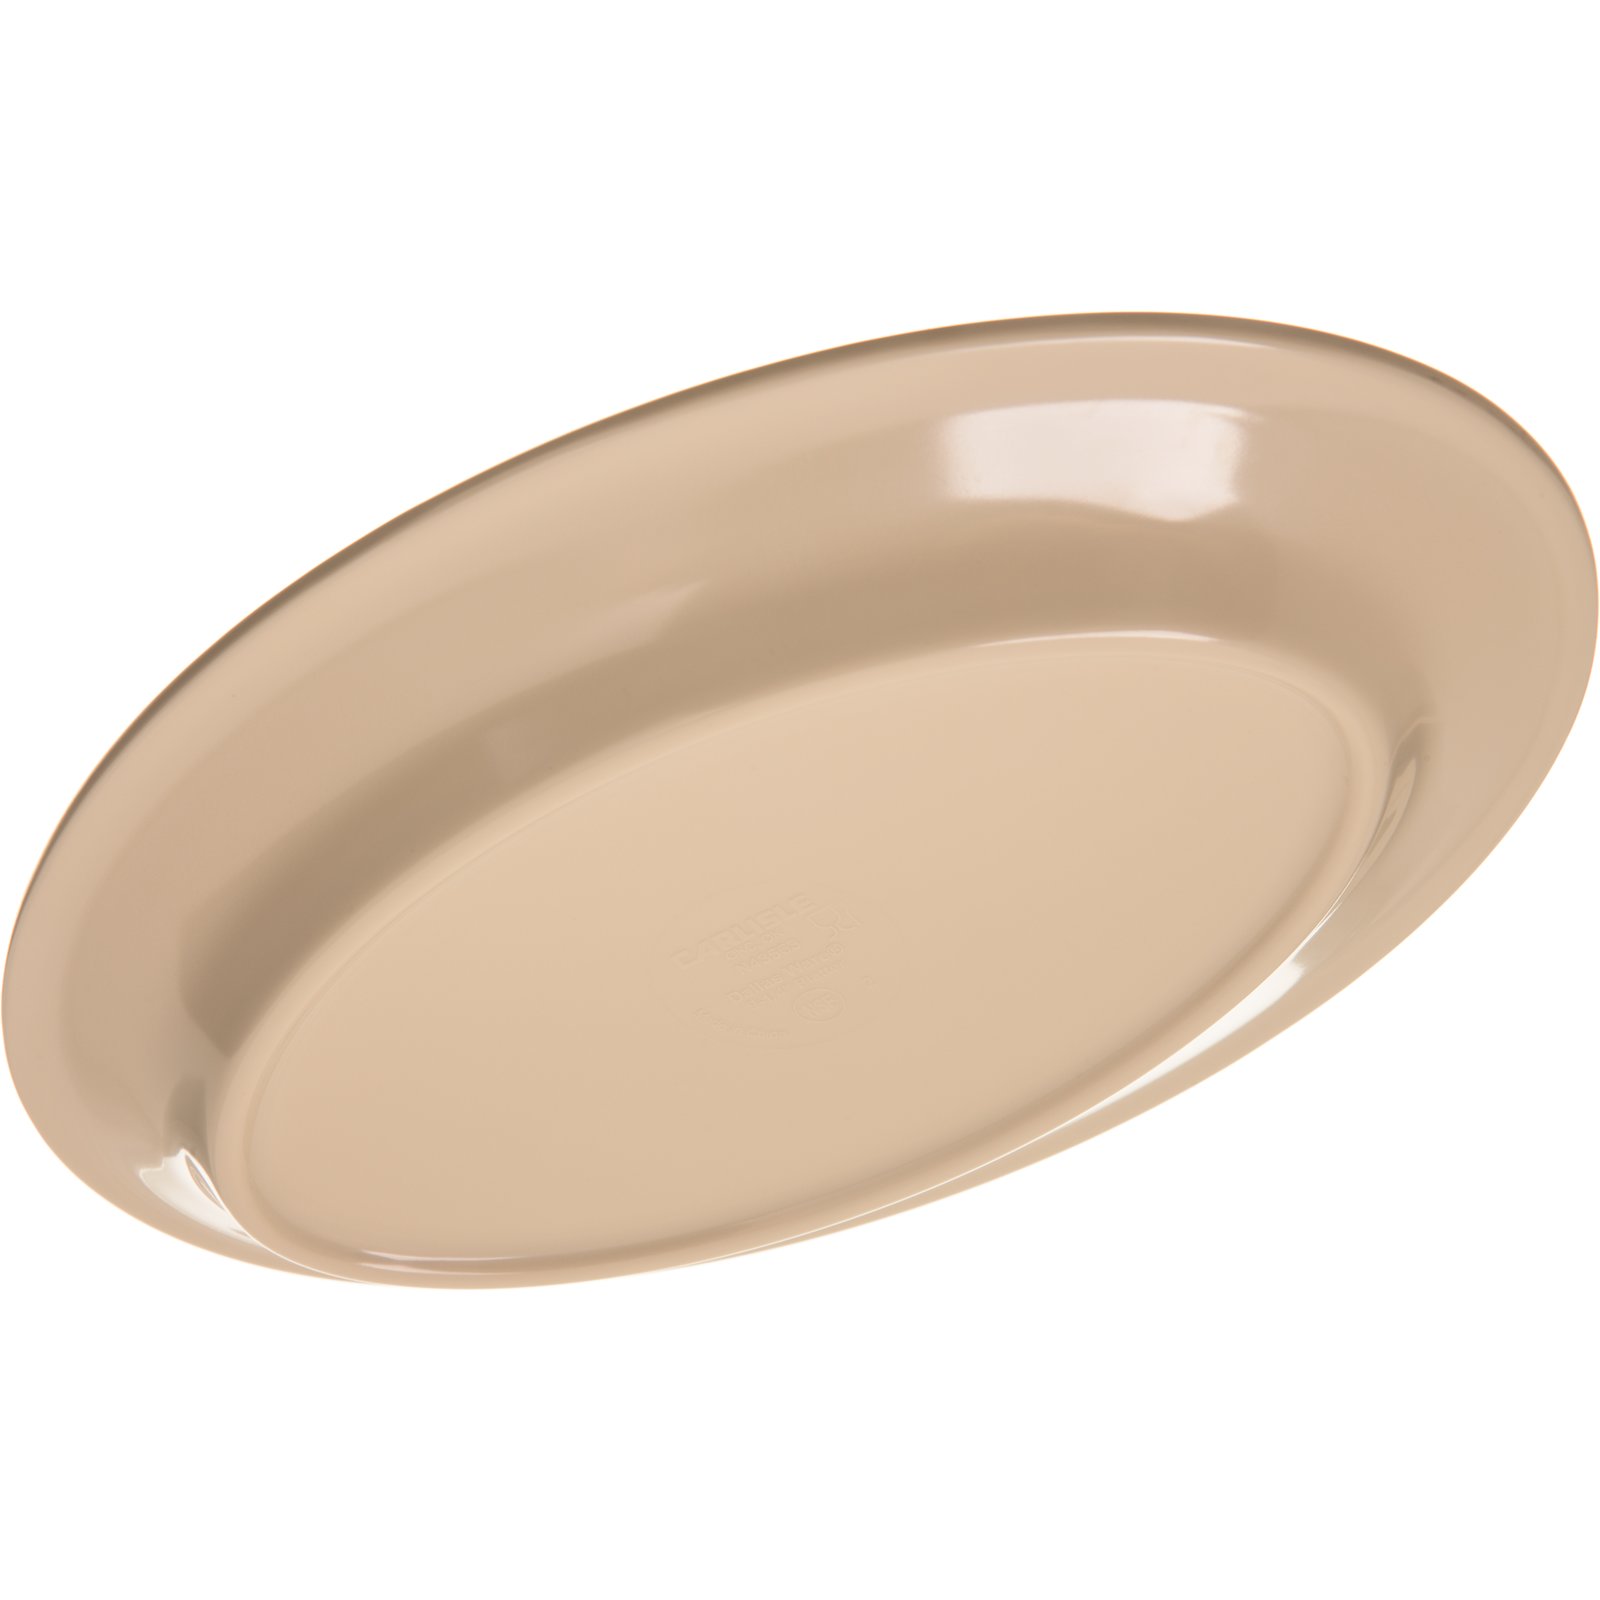 Pack of 24 12 x 8.50 Carlisle FoodService Products 43560-25 Carlisle 4356025 Dallas Ware Melamine Oval Platter Tray 12 x 8.50 Tan